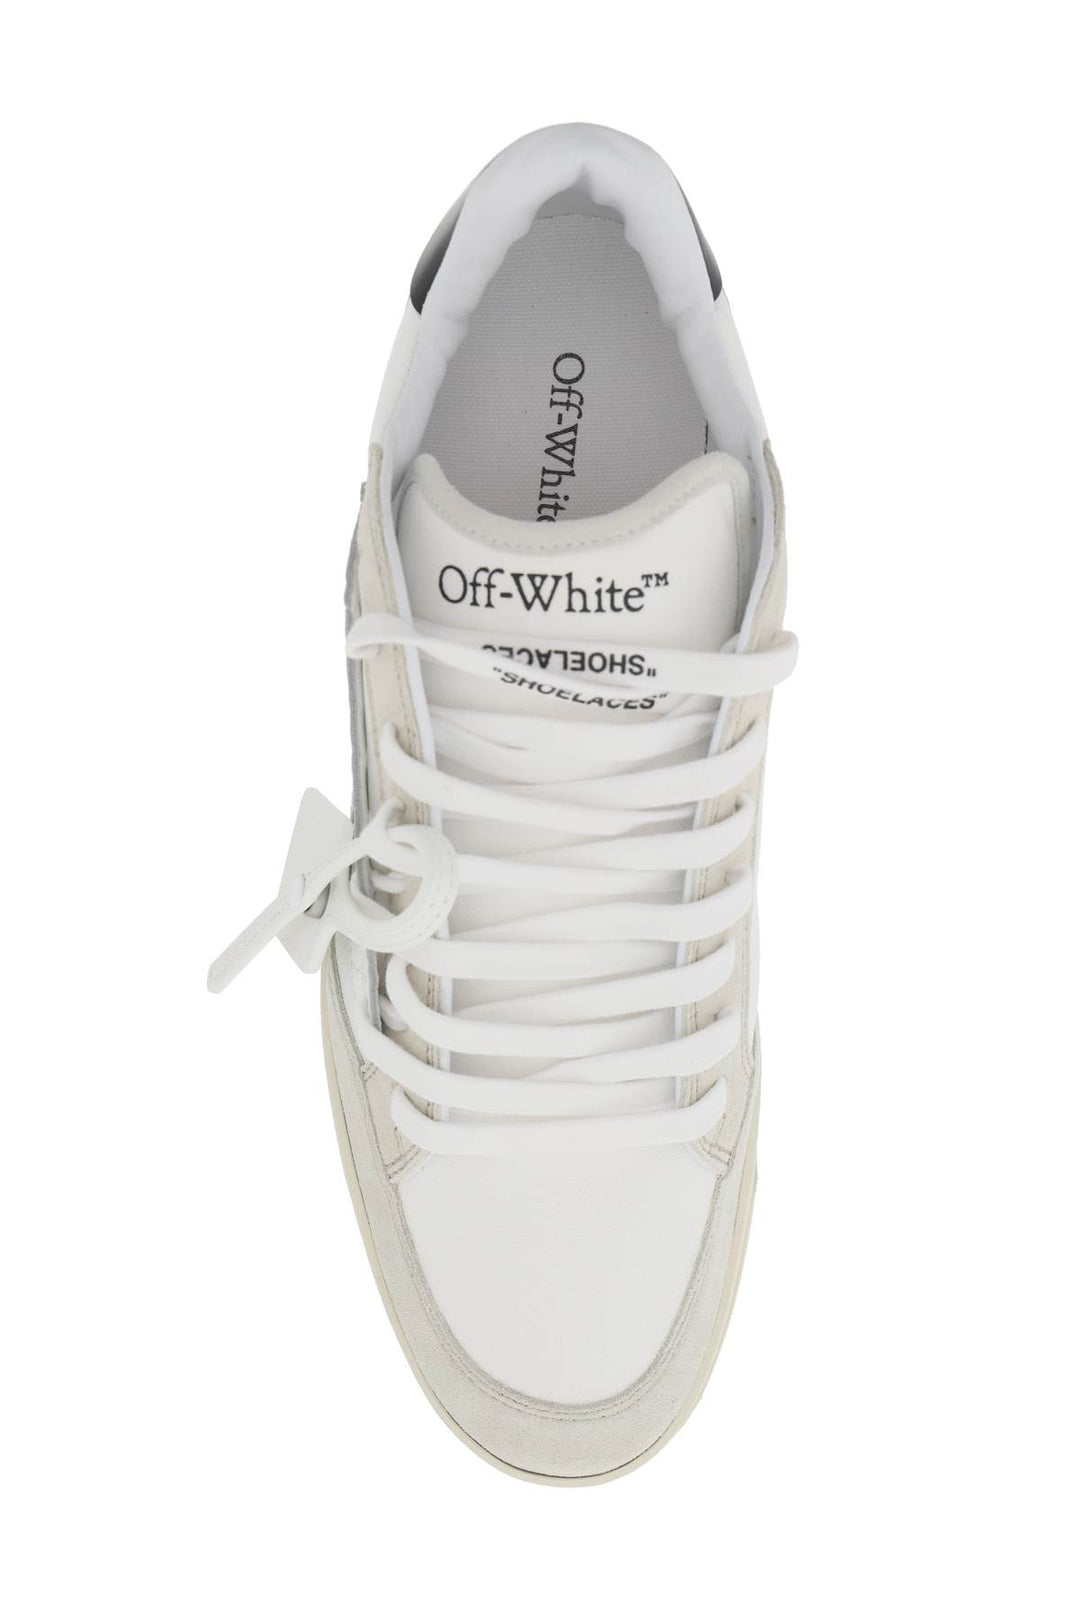 Off White 5.0 Sneakers